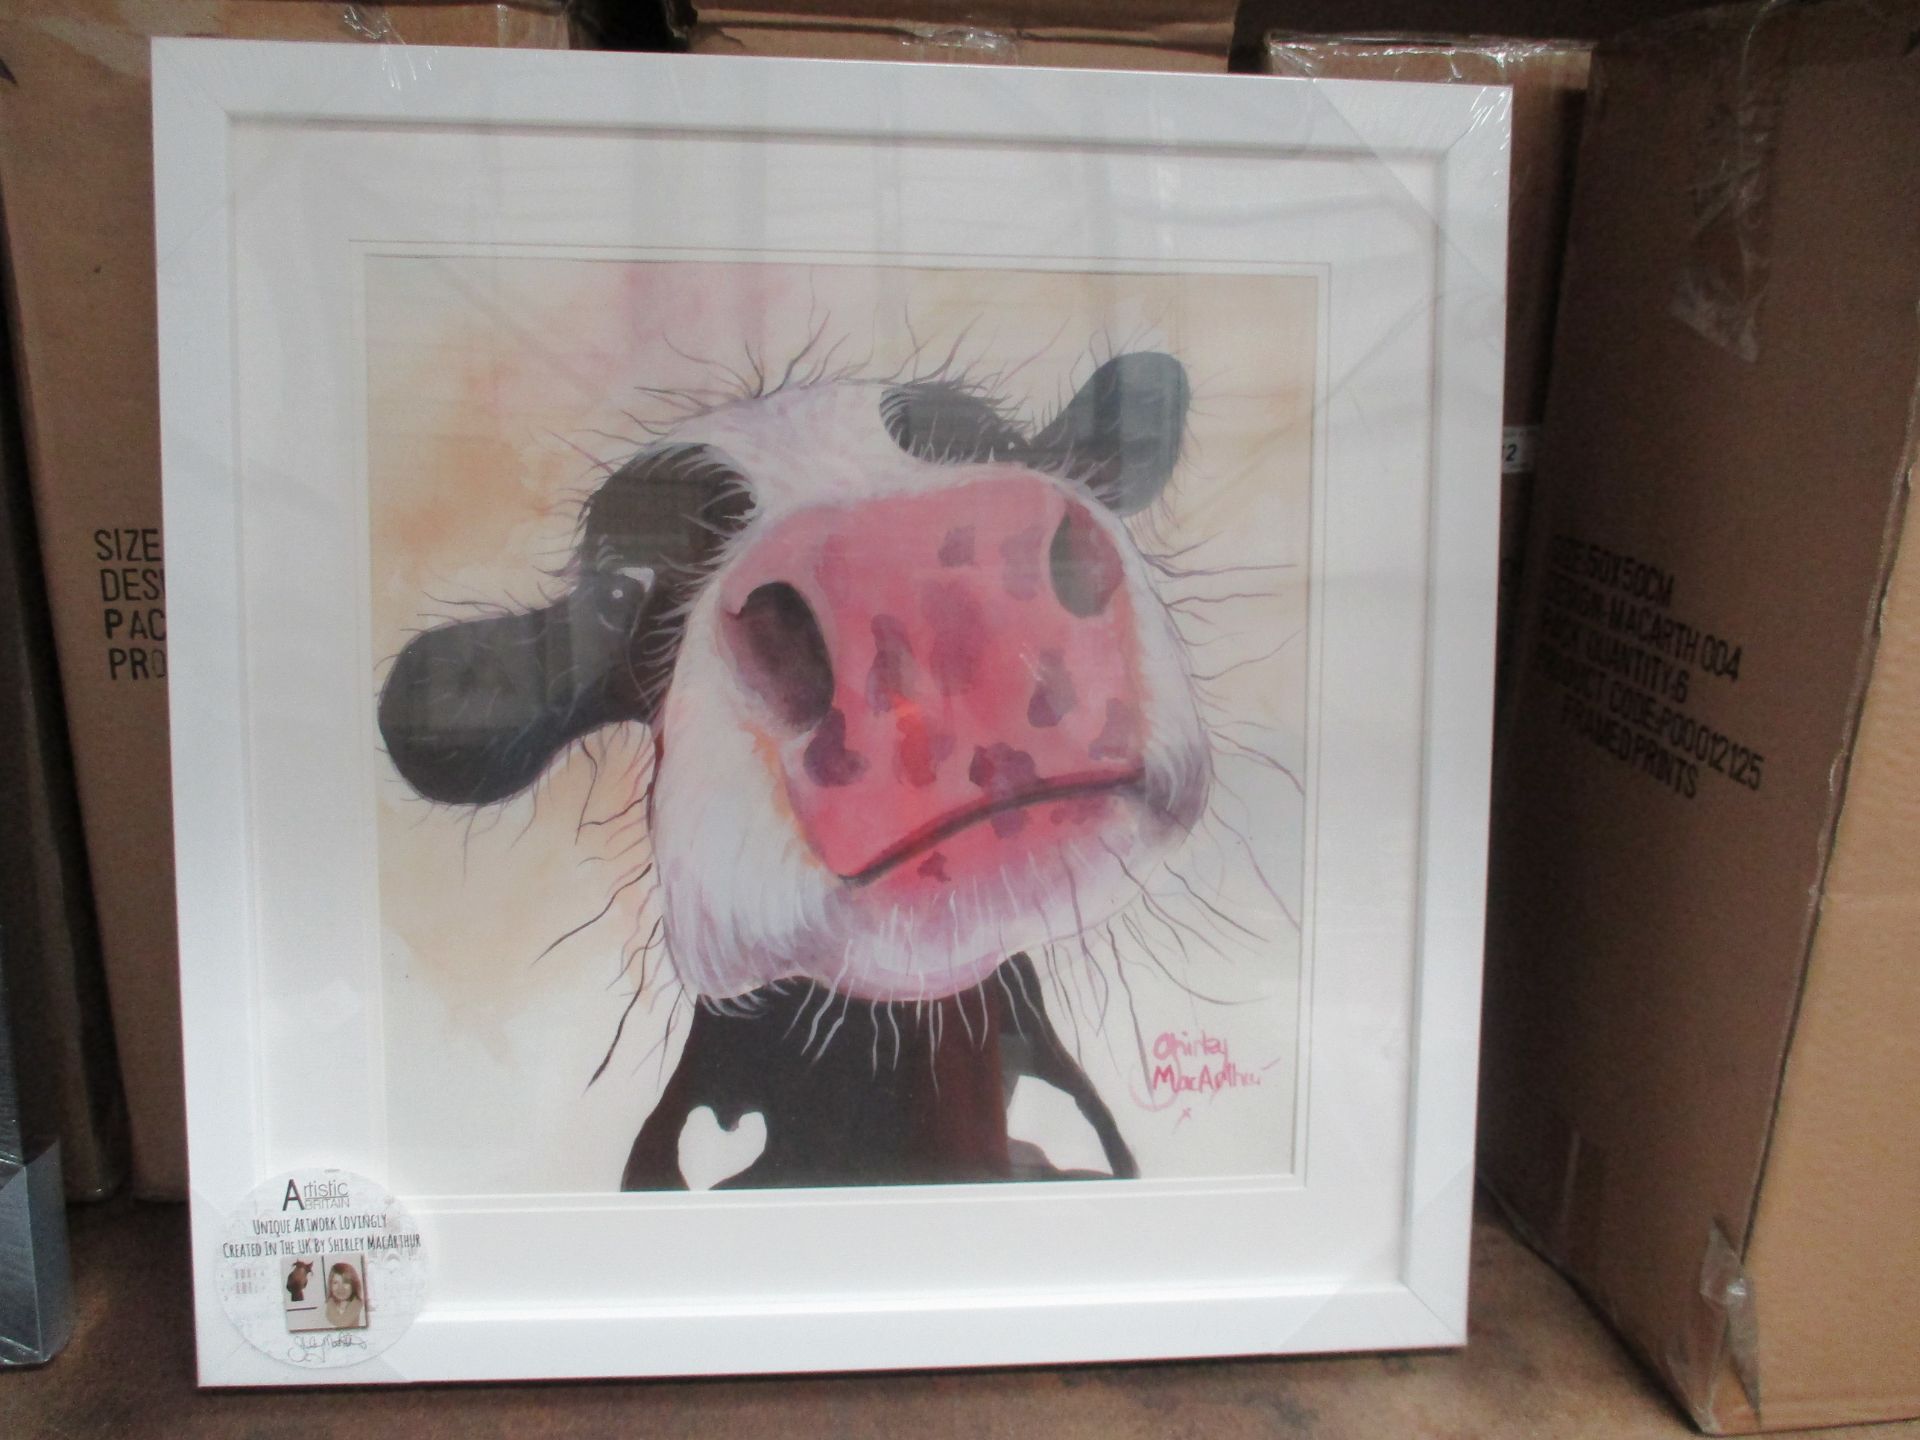 6 x Artistic Britain framed prints of "Cows" by Shirley MacArthur 35 x 35 cm [1 outer box]